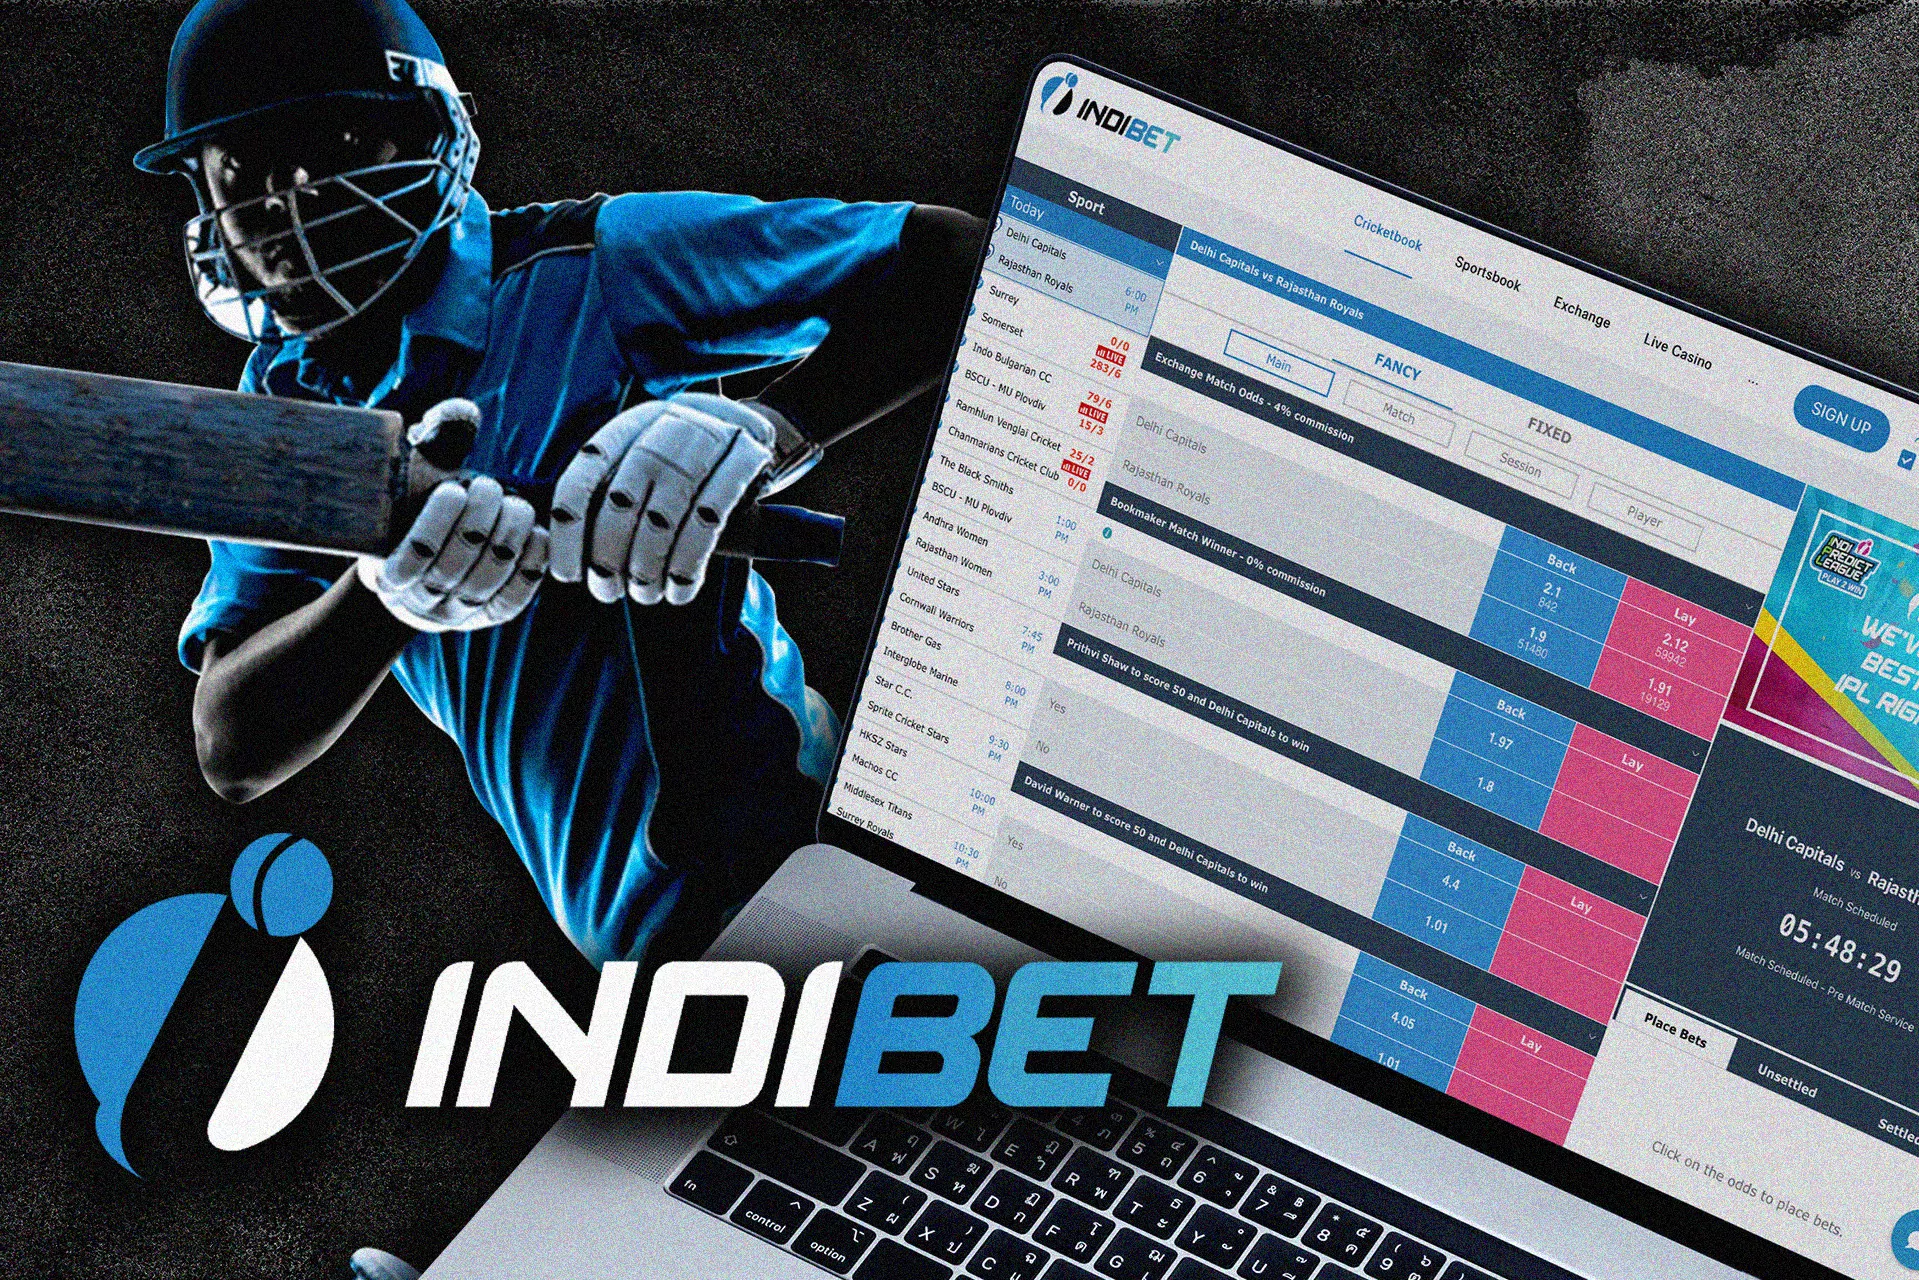 Indibet official website for cricket betting.